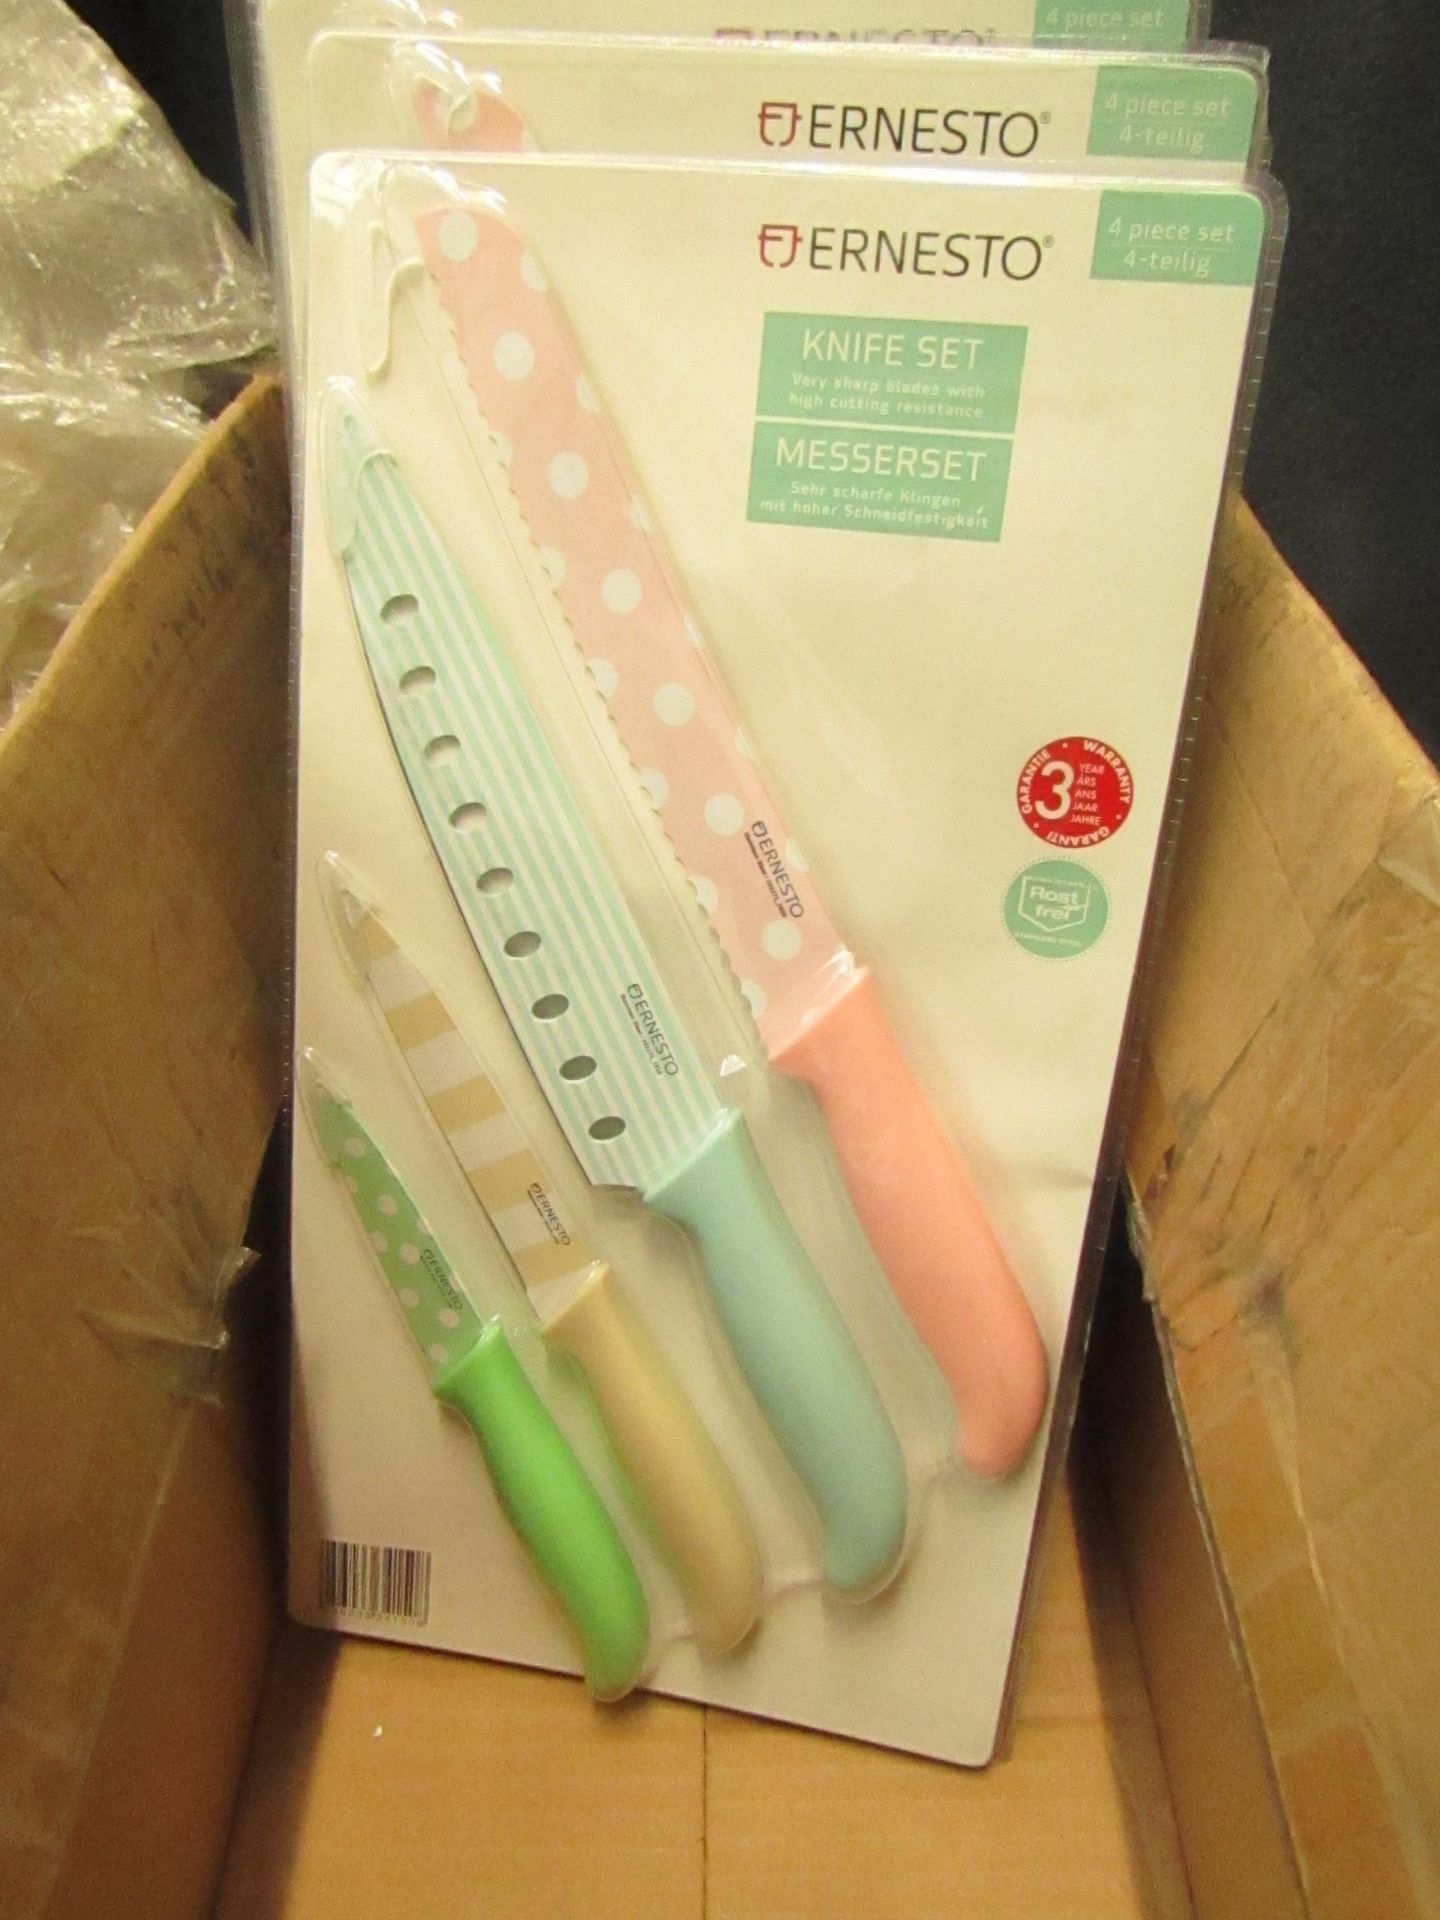 Ernesto - 4 Piece Knife Set (Multi-Colours & Pattern/Designs) - New & Packaged.